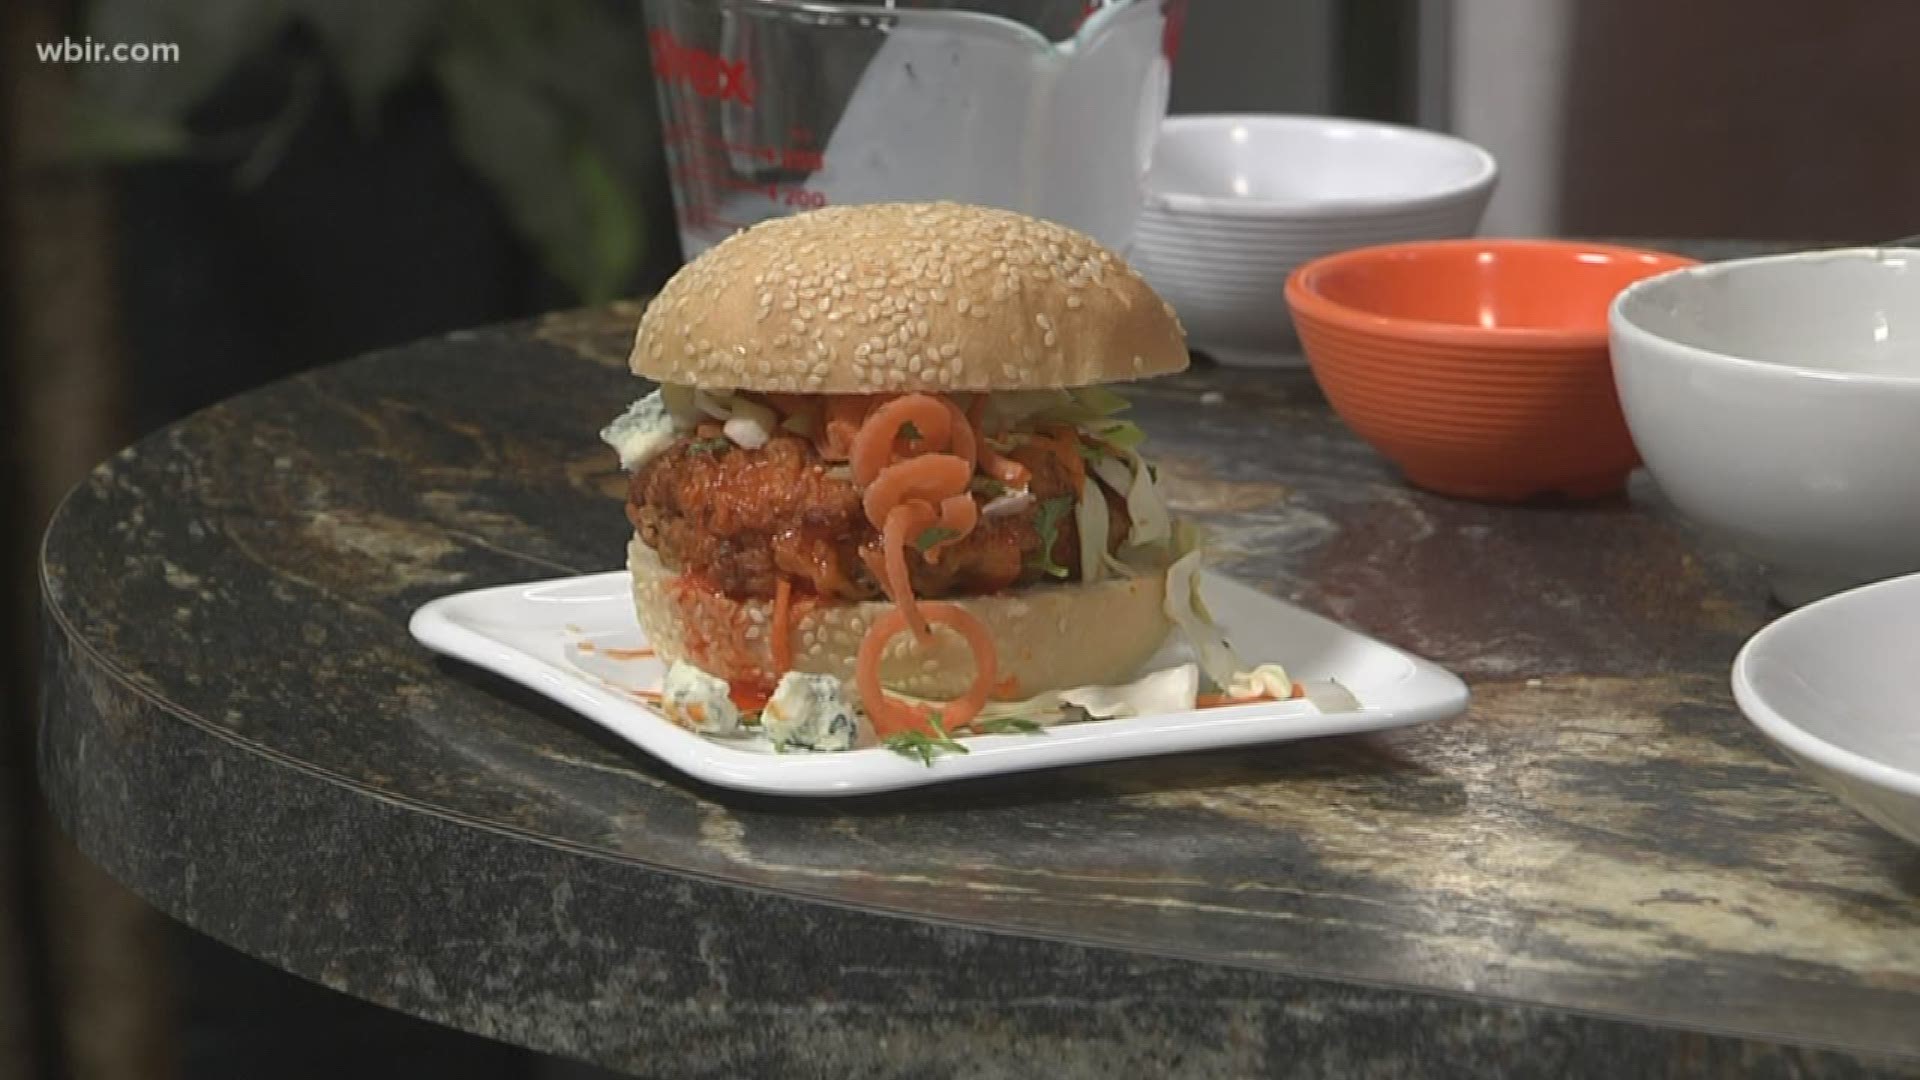 Mahasti from Space Head shows us how to make some buffalo chicken sandwiches.